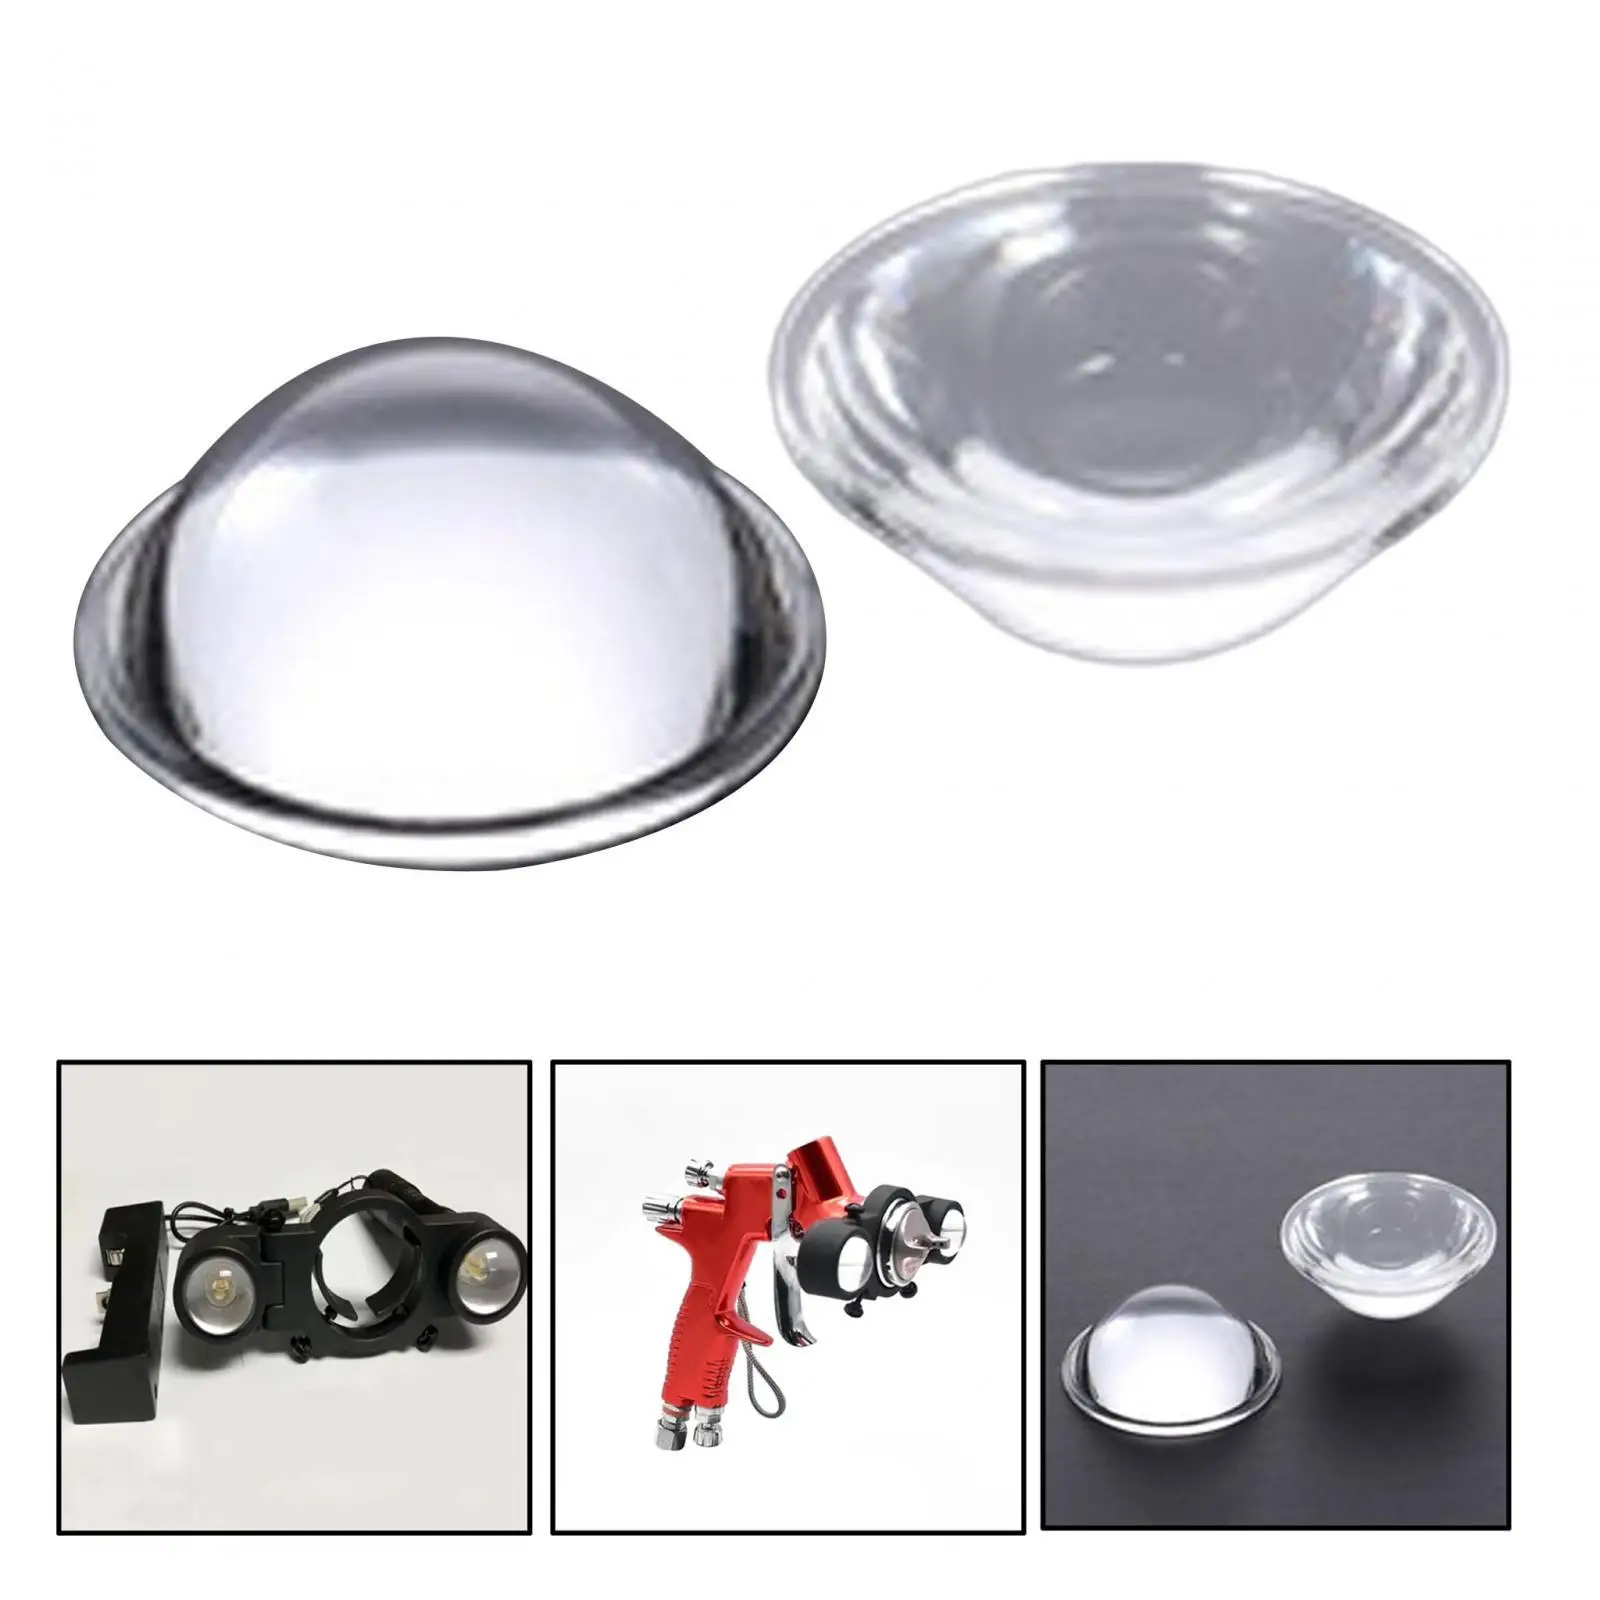 Paint Spray Fill Light Plano Convex Lenses Spray Painting Auto Parts Spray Paint 27mm Diameter Direct Replaces Clear